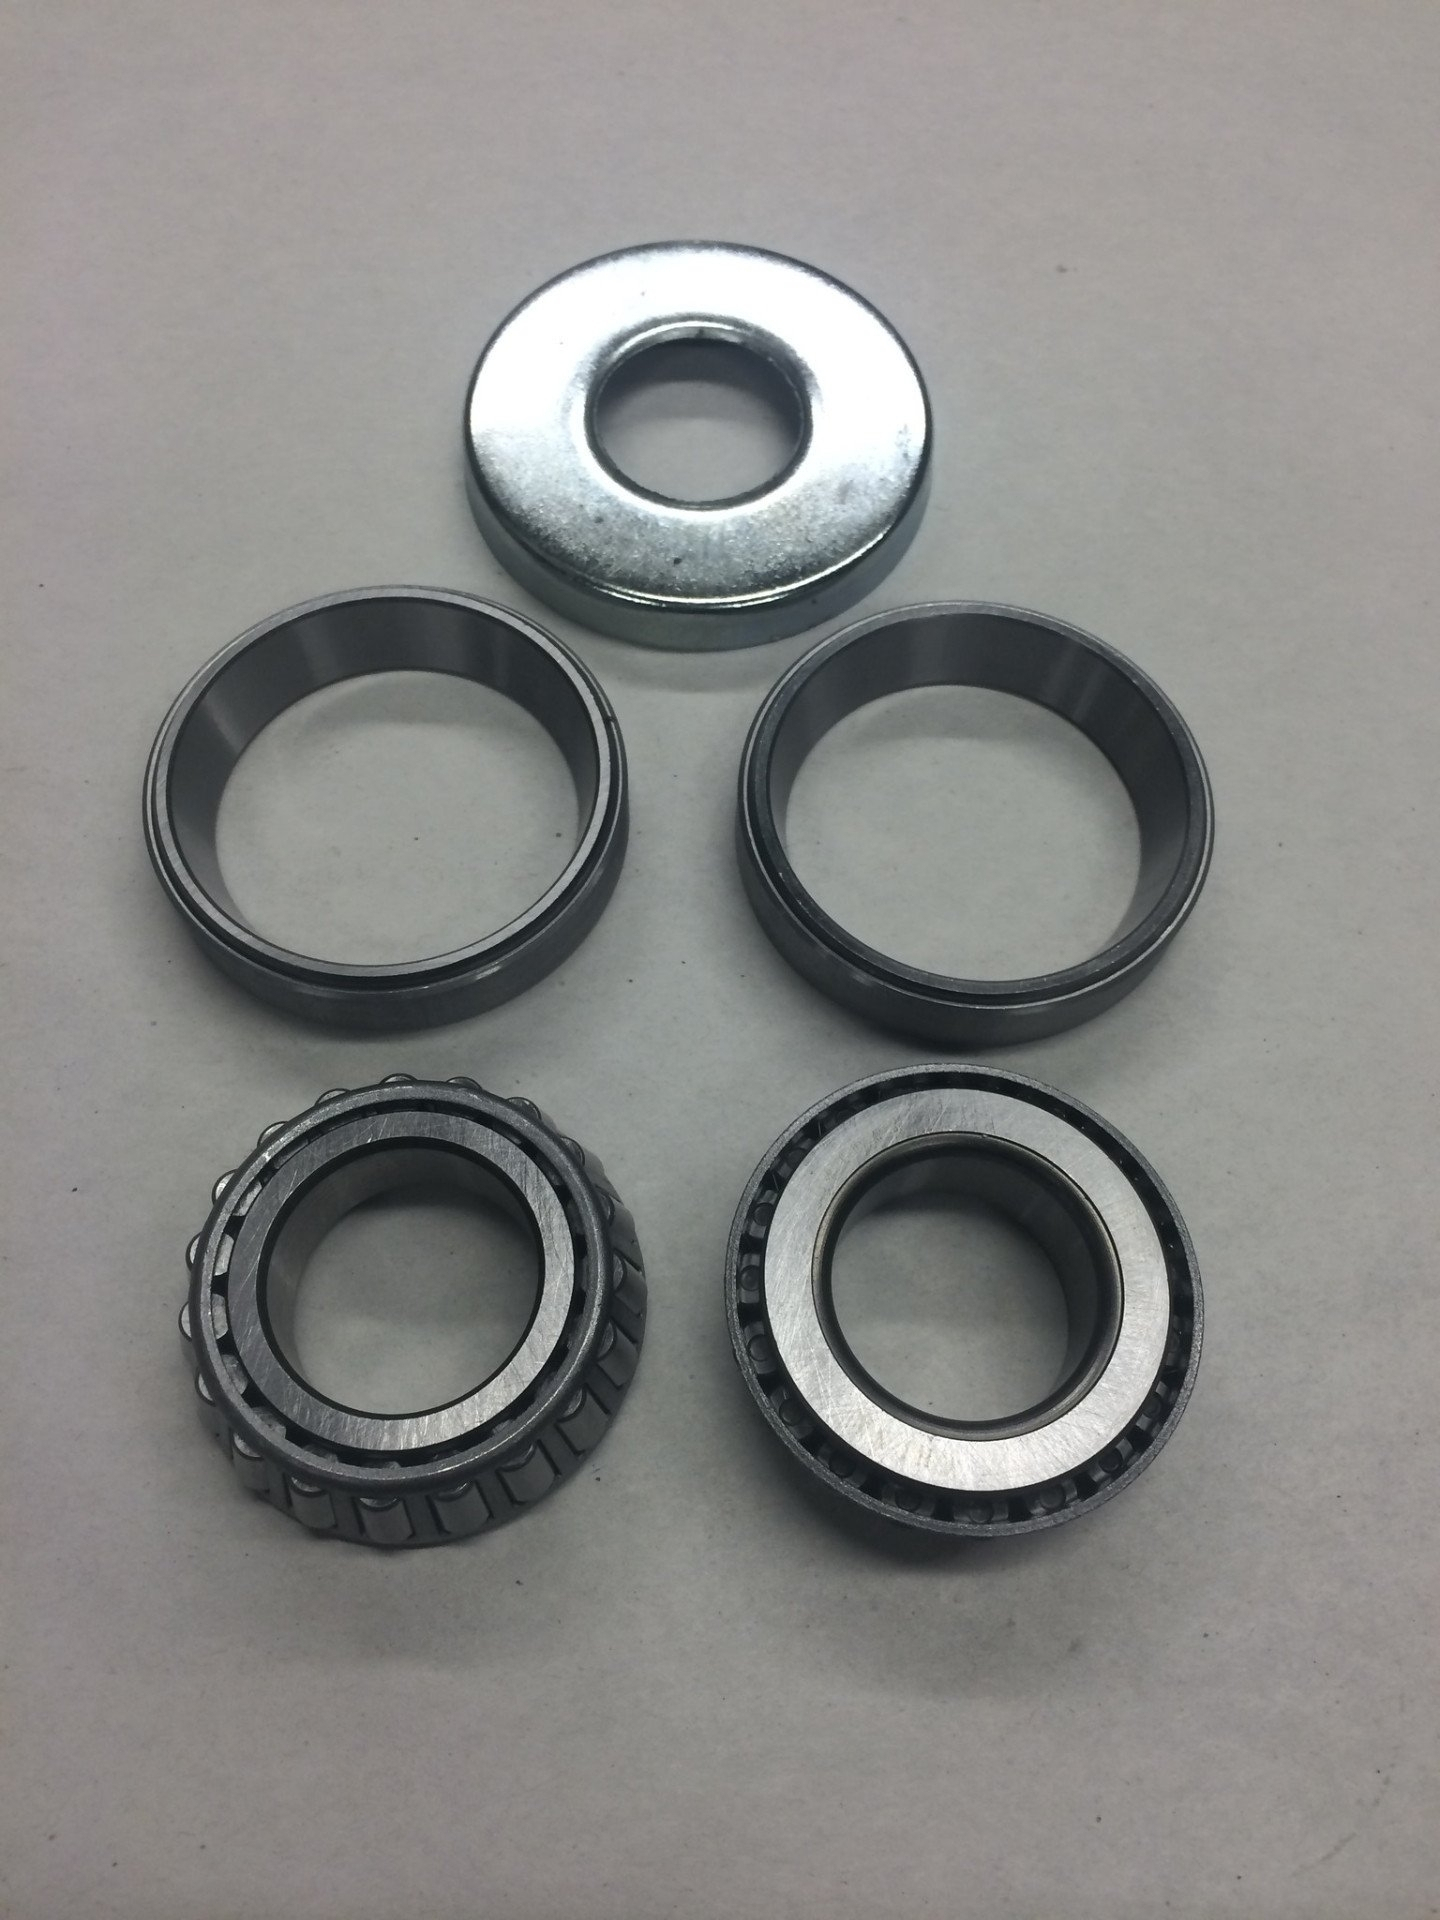 Tapered Neck Bearing 1" for Harley Front End & Triumph Frame 1957-1970 650 AND 500 1967-1973